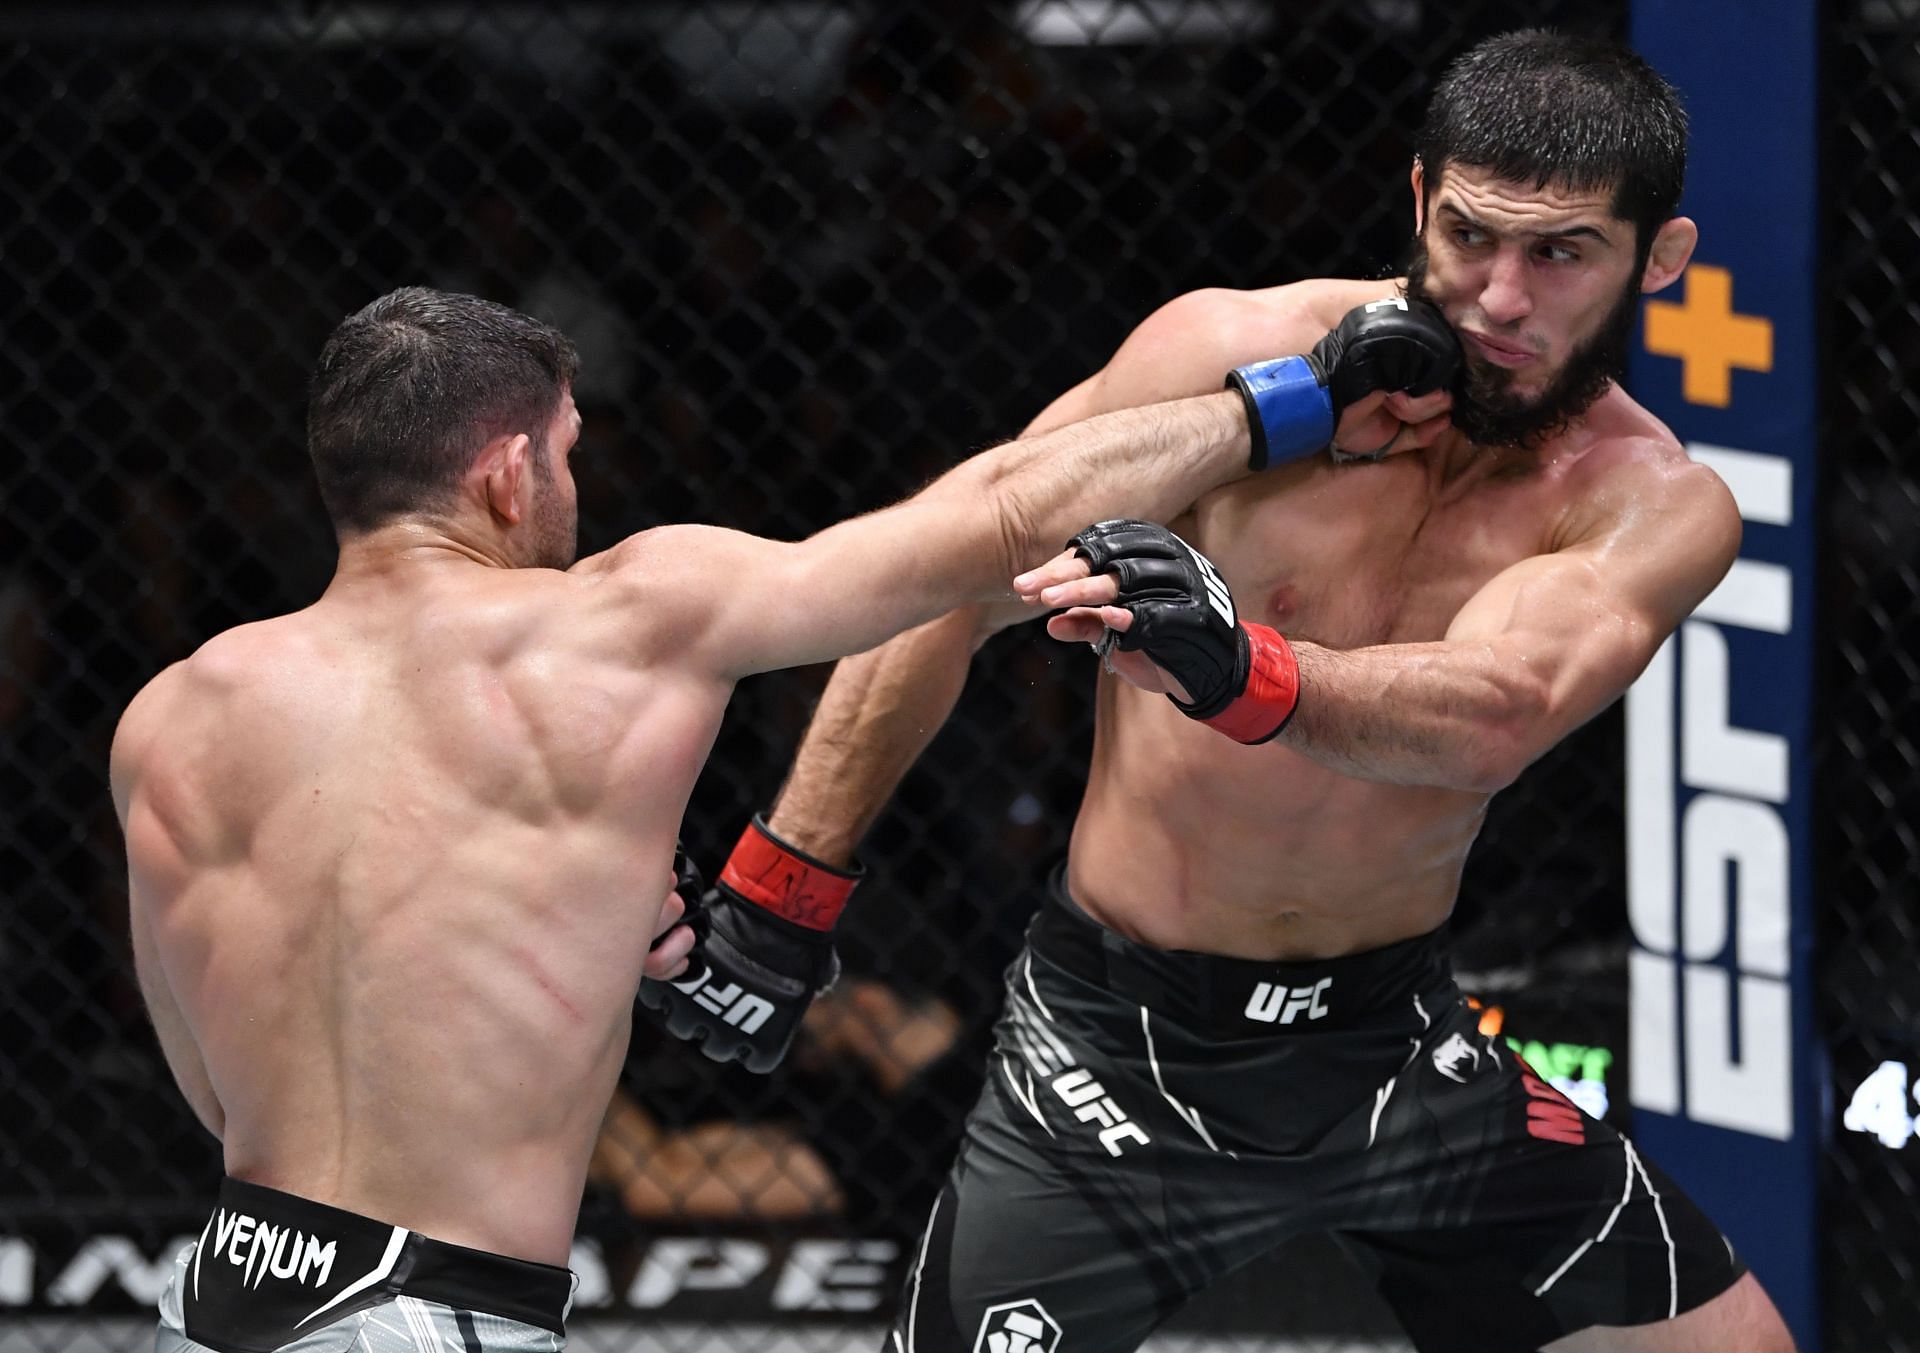 Could Conor McGregor find a way to outstrike Islam Makhachev?